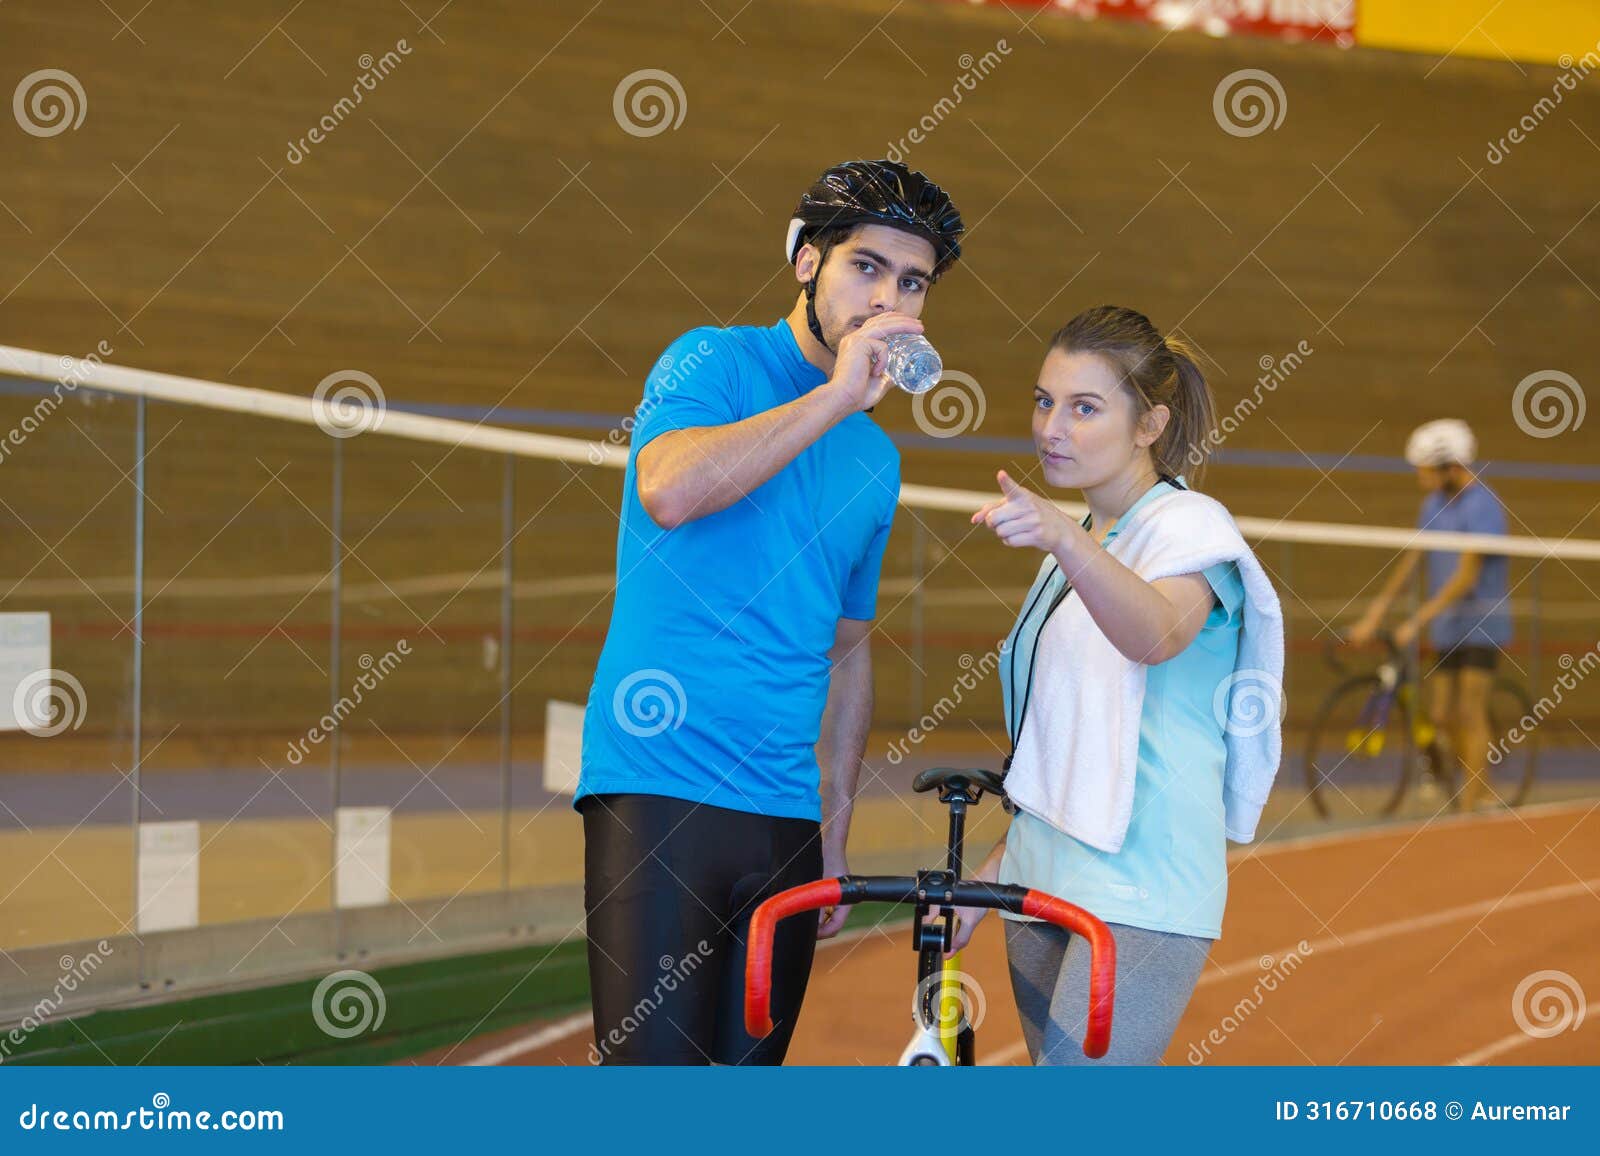 male cyclist holding bottled water in velodrome